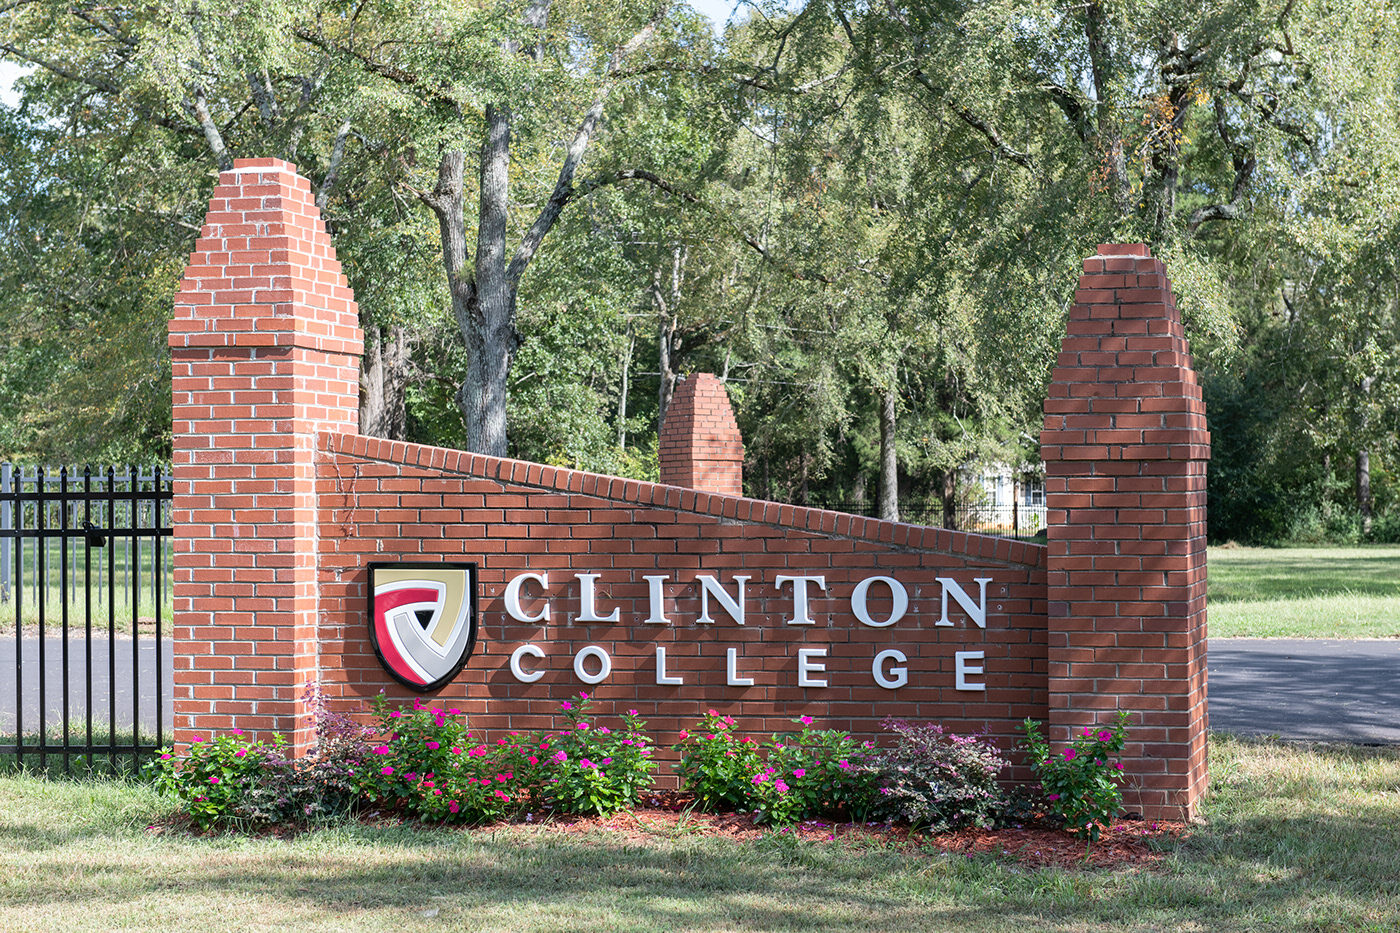 Clinton College To Offer Free Tuition For Full-Time Students This Fall